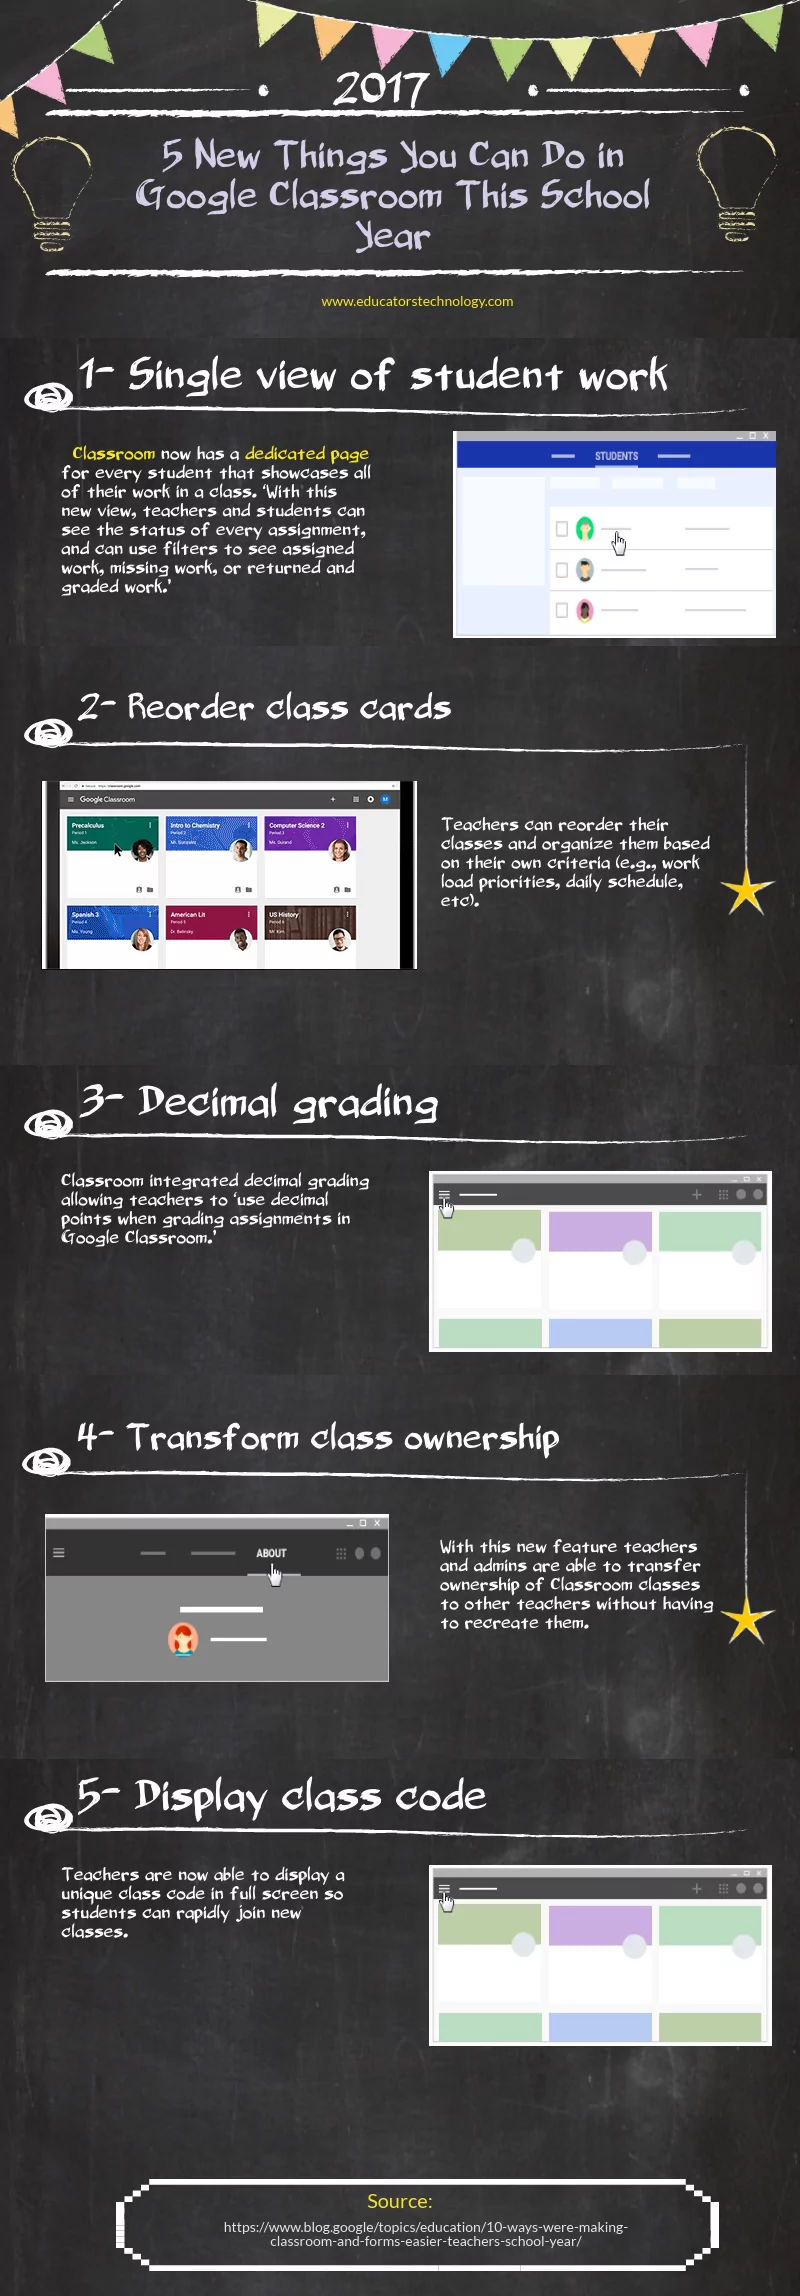 5 New Things You Can Do in Google Classroom This School Year